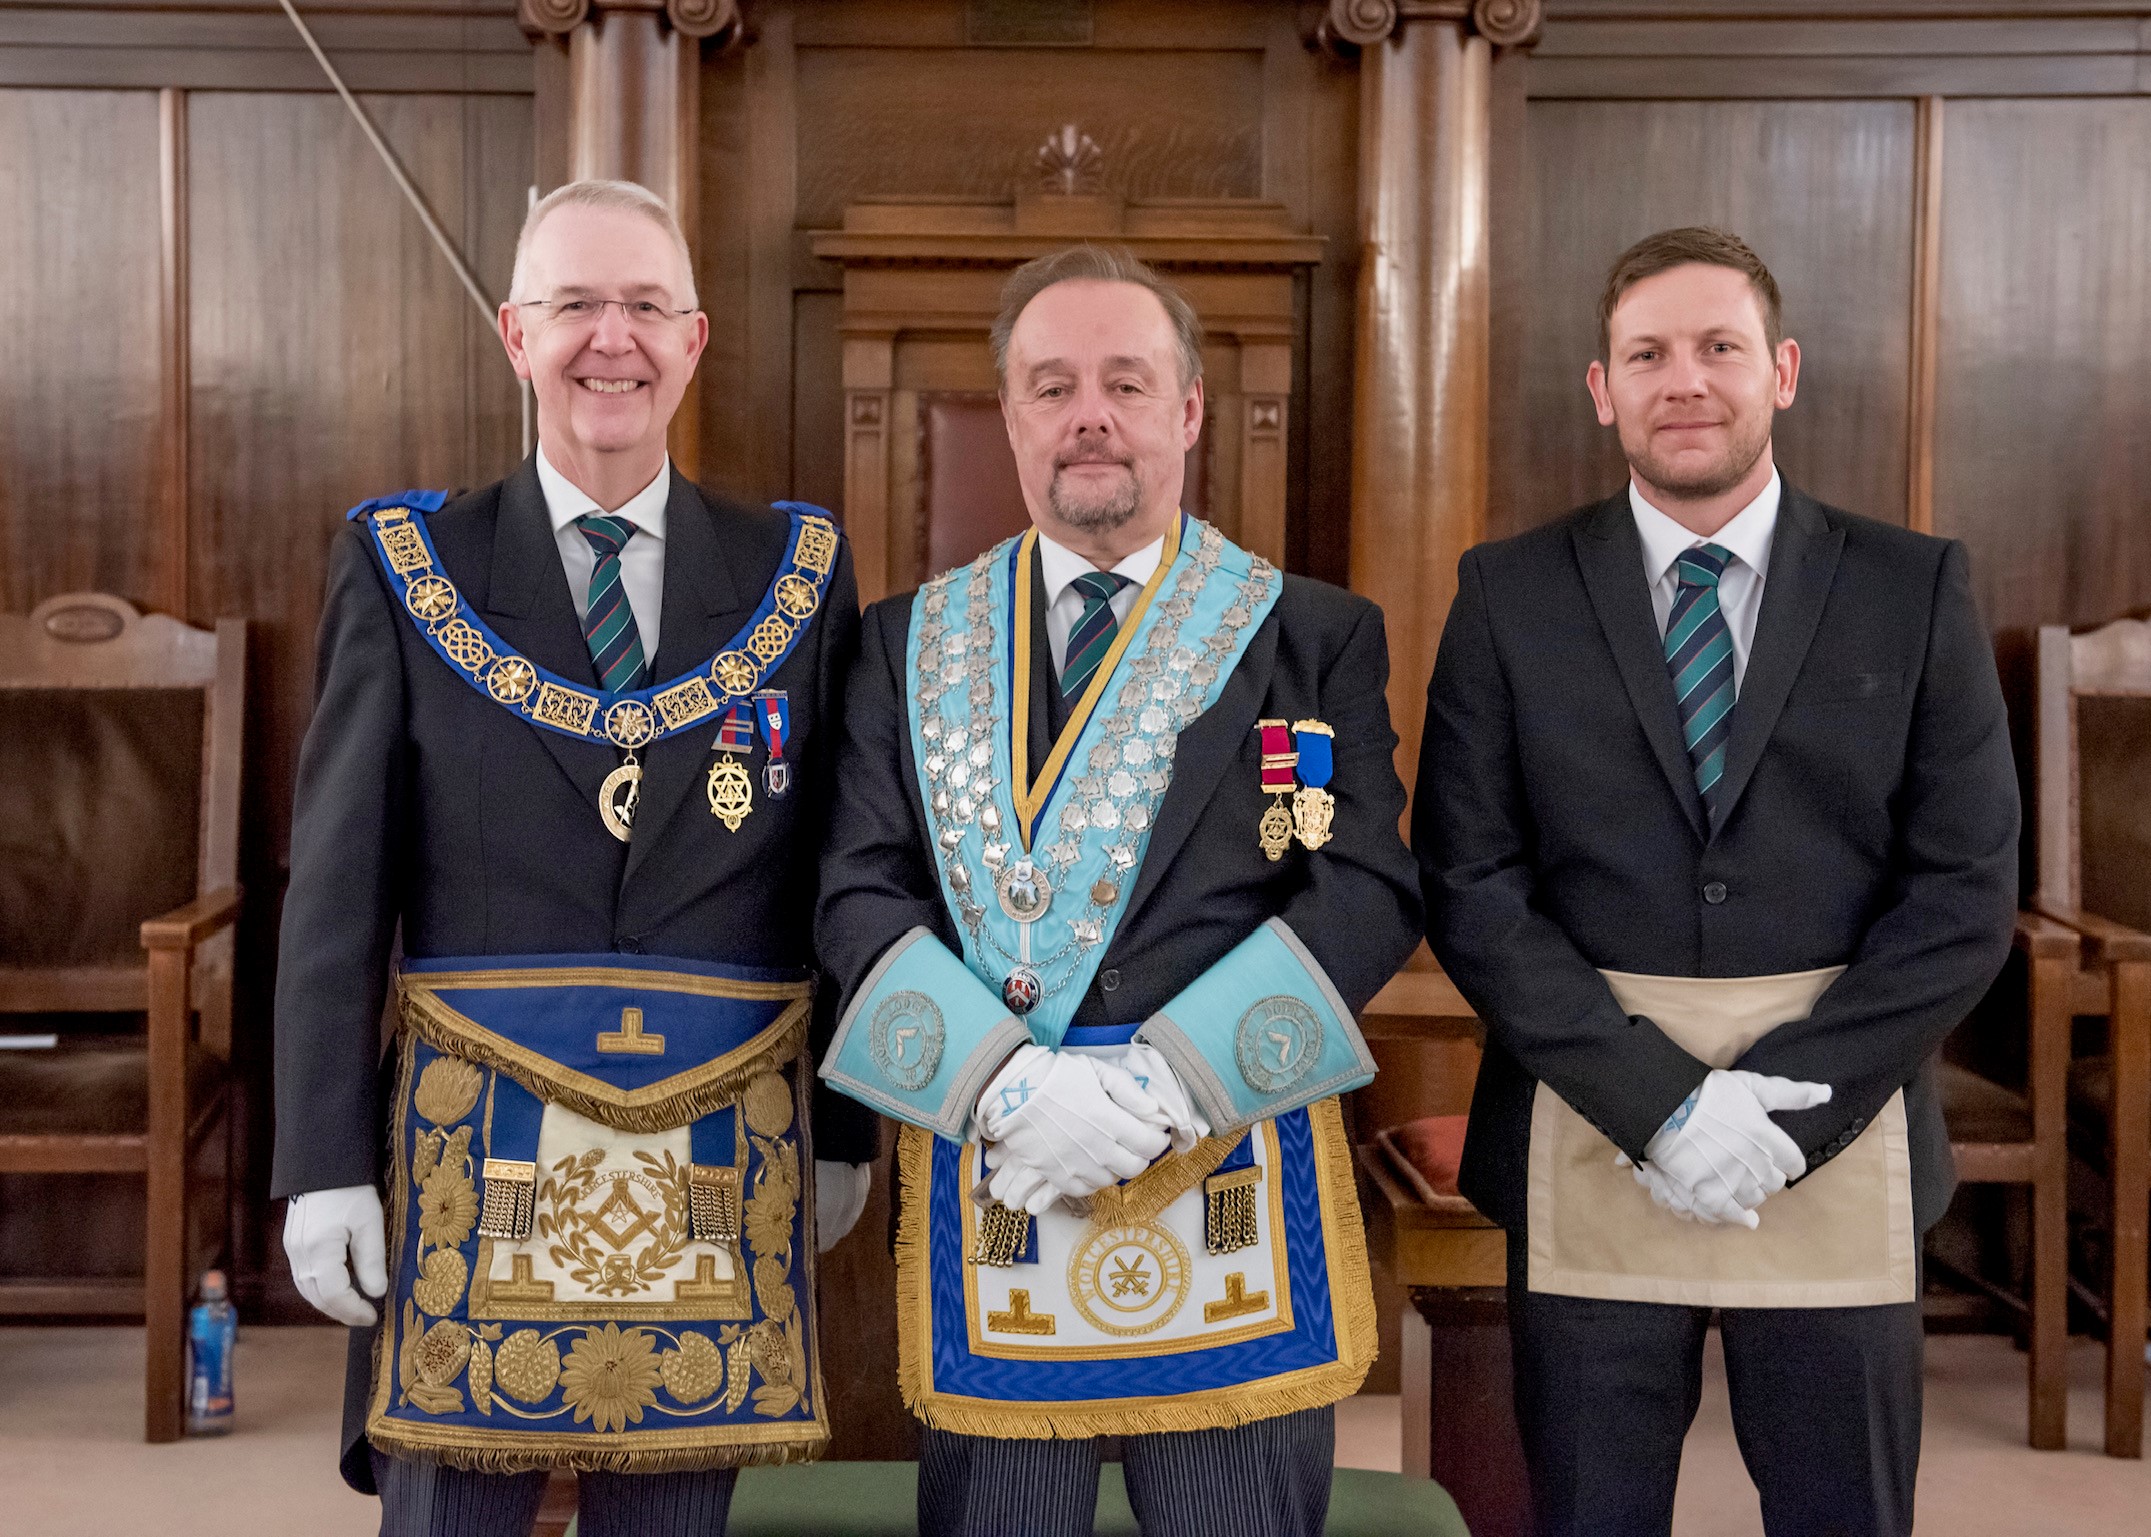 Provincial Grand Master of Worcestershire stands with other two Freemasons during a four ceremonies in a day event